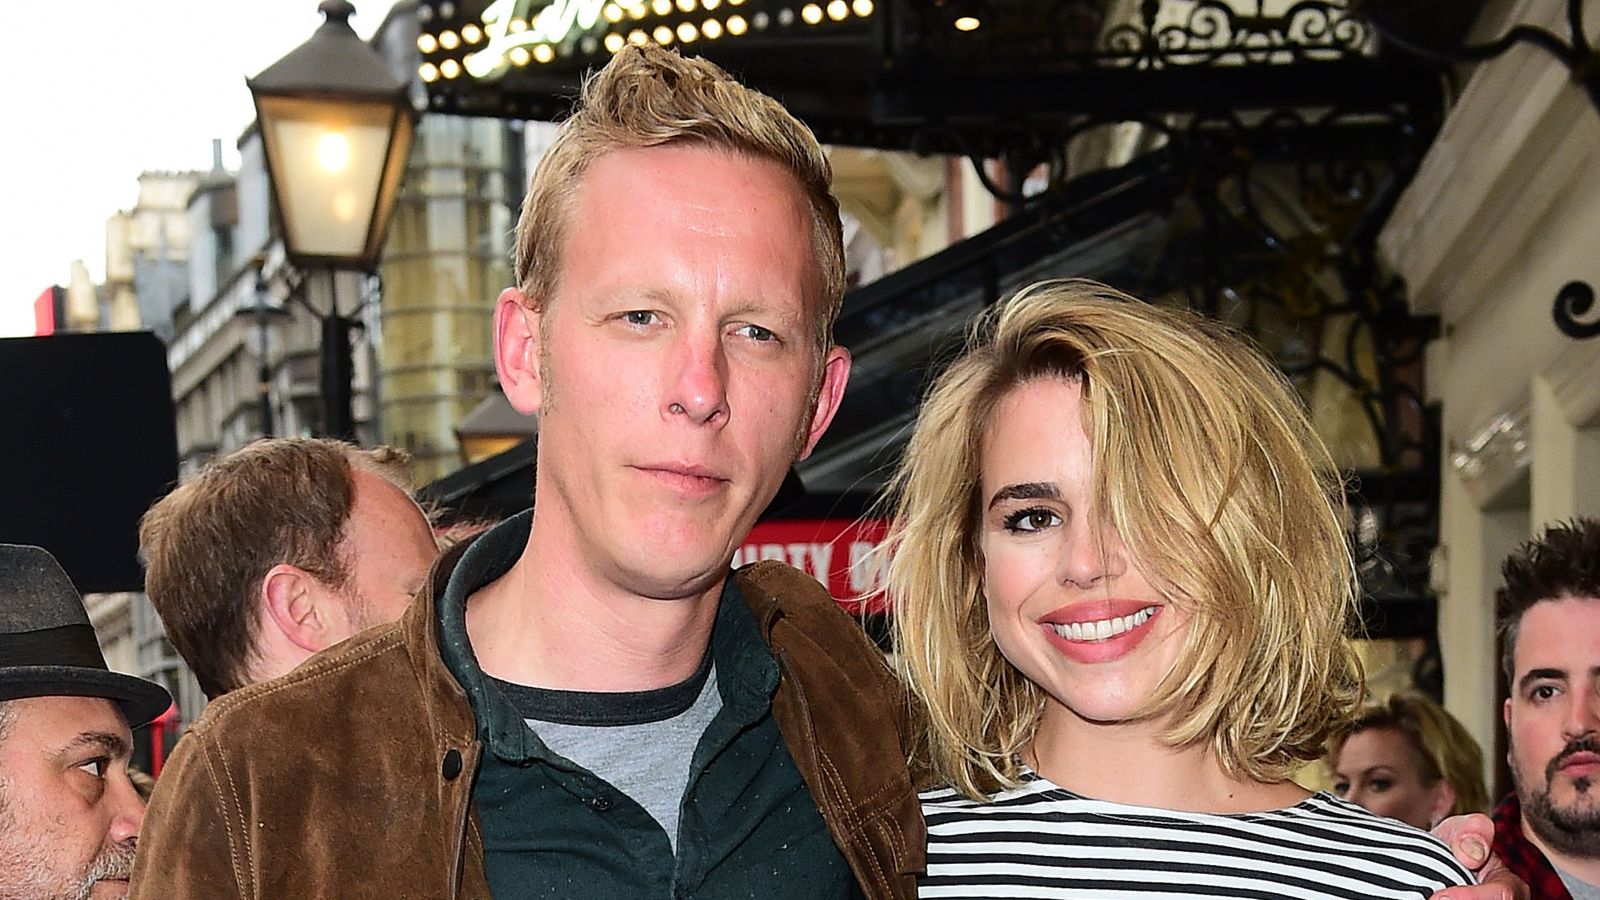 Laurence Fox says ex-wife Billie Piper's co-parenting claims are 'outright lies'